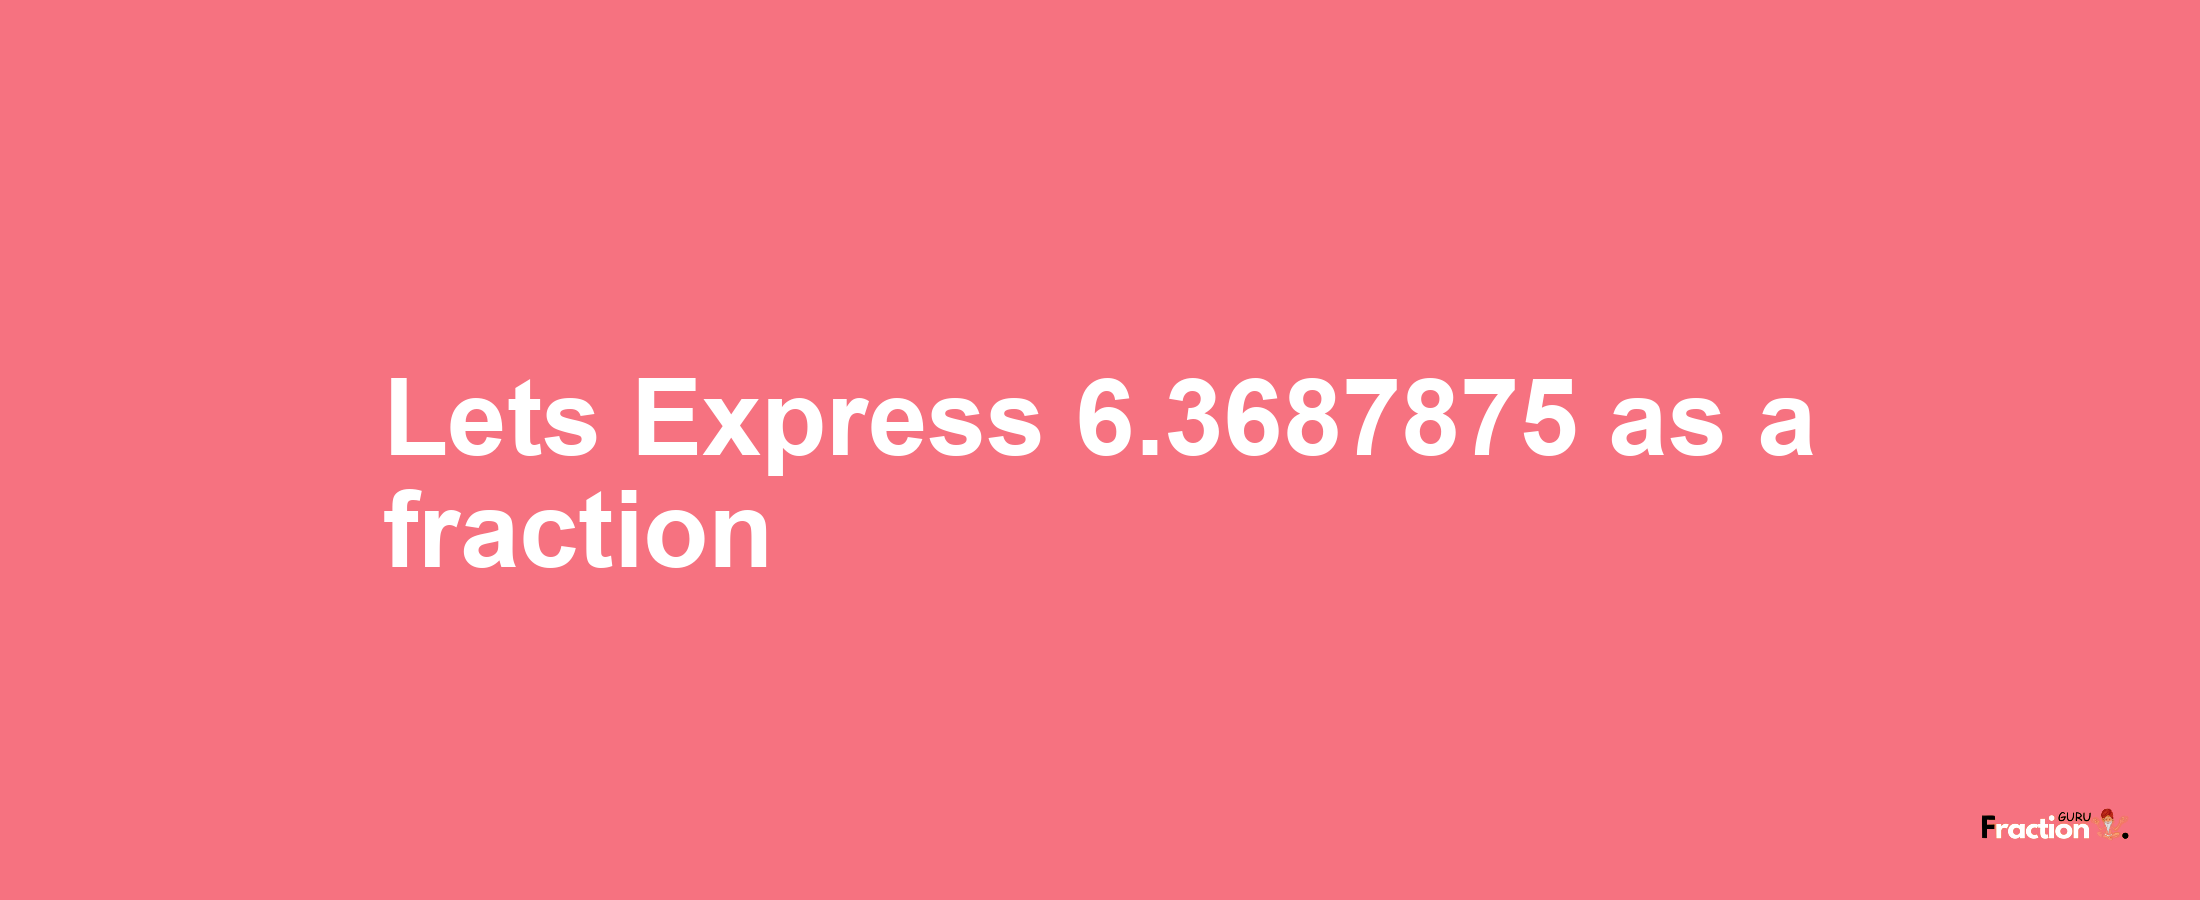 Lets Express 6.3687875 as afraction